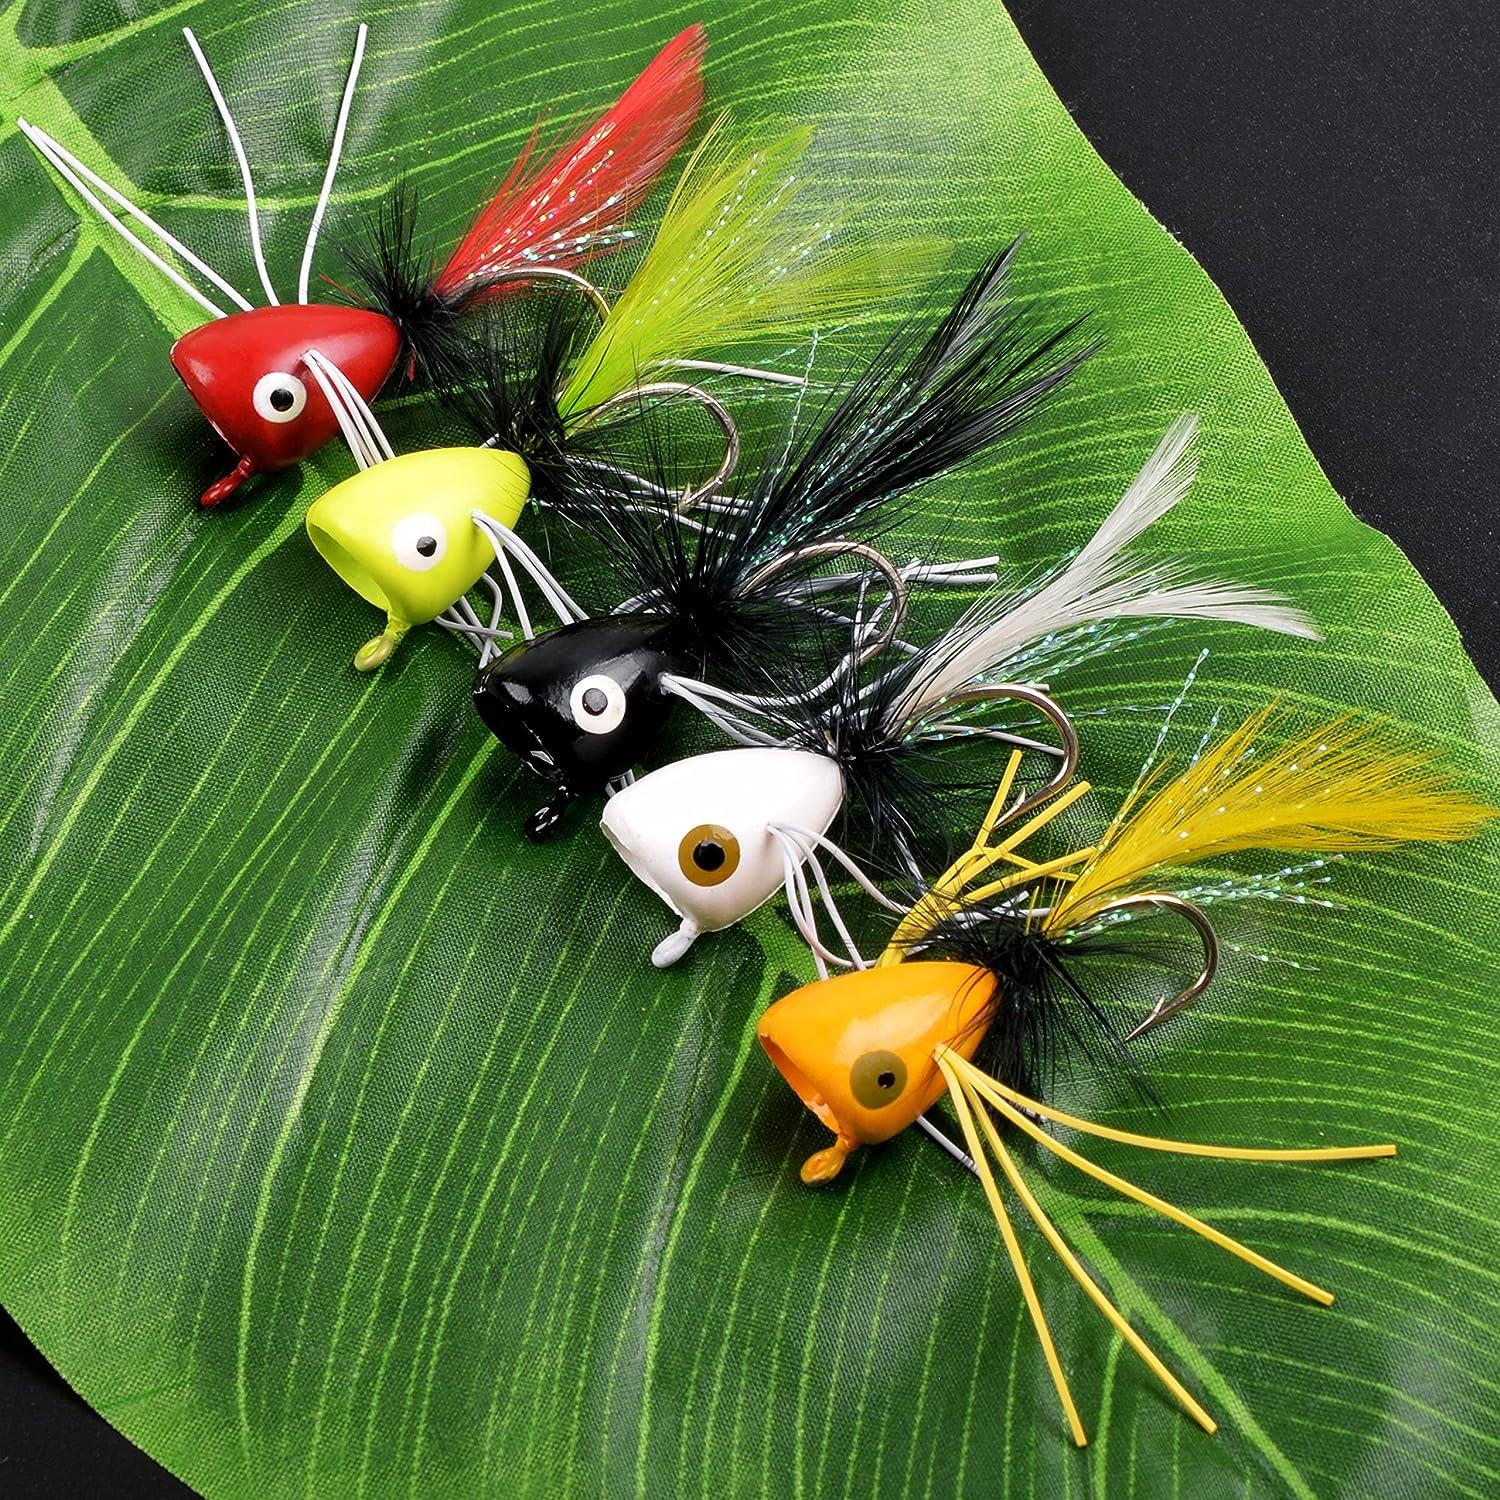 Fly Fishing Poppers, 12pcs Popper Flies for Fly Fishing Topwater Bass  Panfish Trout Salmon Bluegill Poppers Flies Bugs Lures Colorful Fishing  Bait Lures with Hooks for Freshwater Fishing Assortment white-12pcs